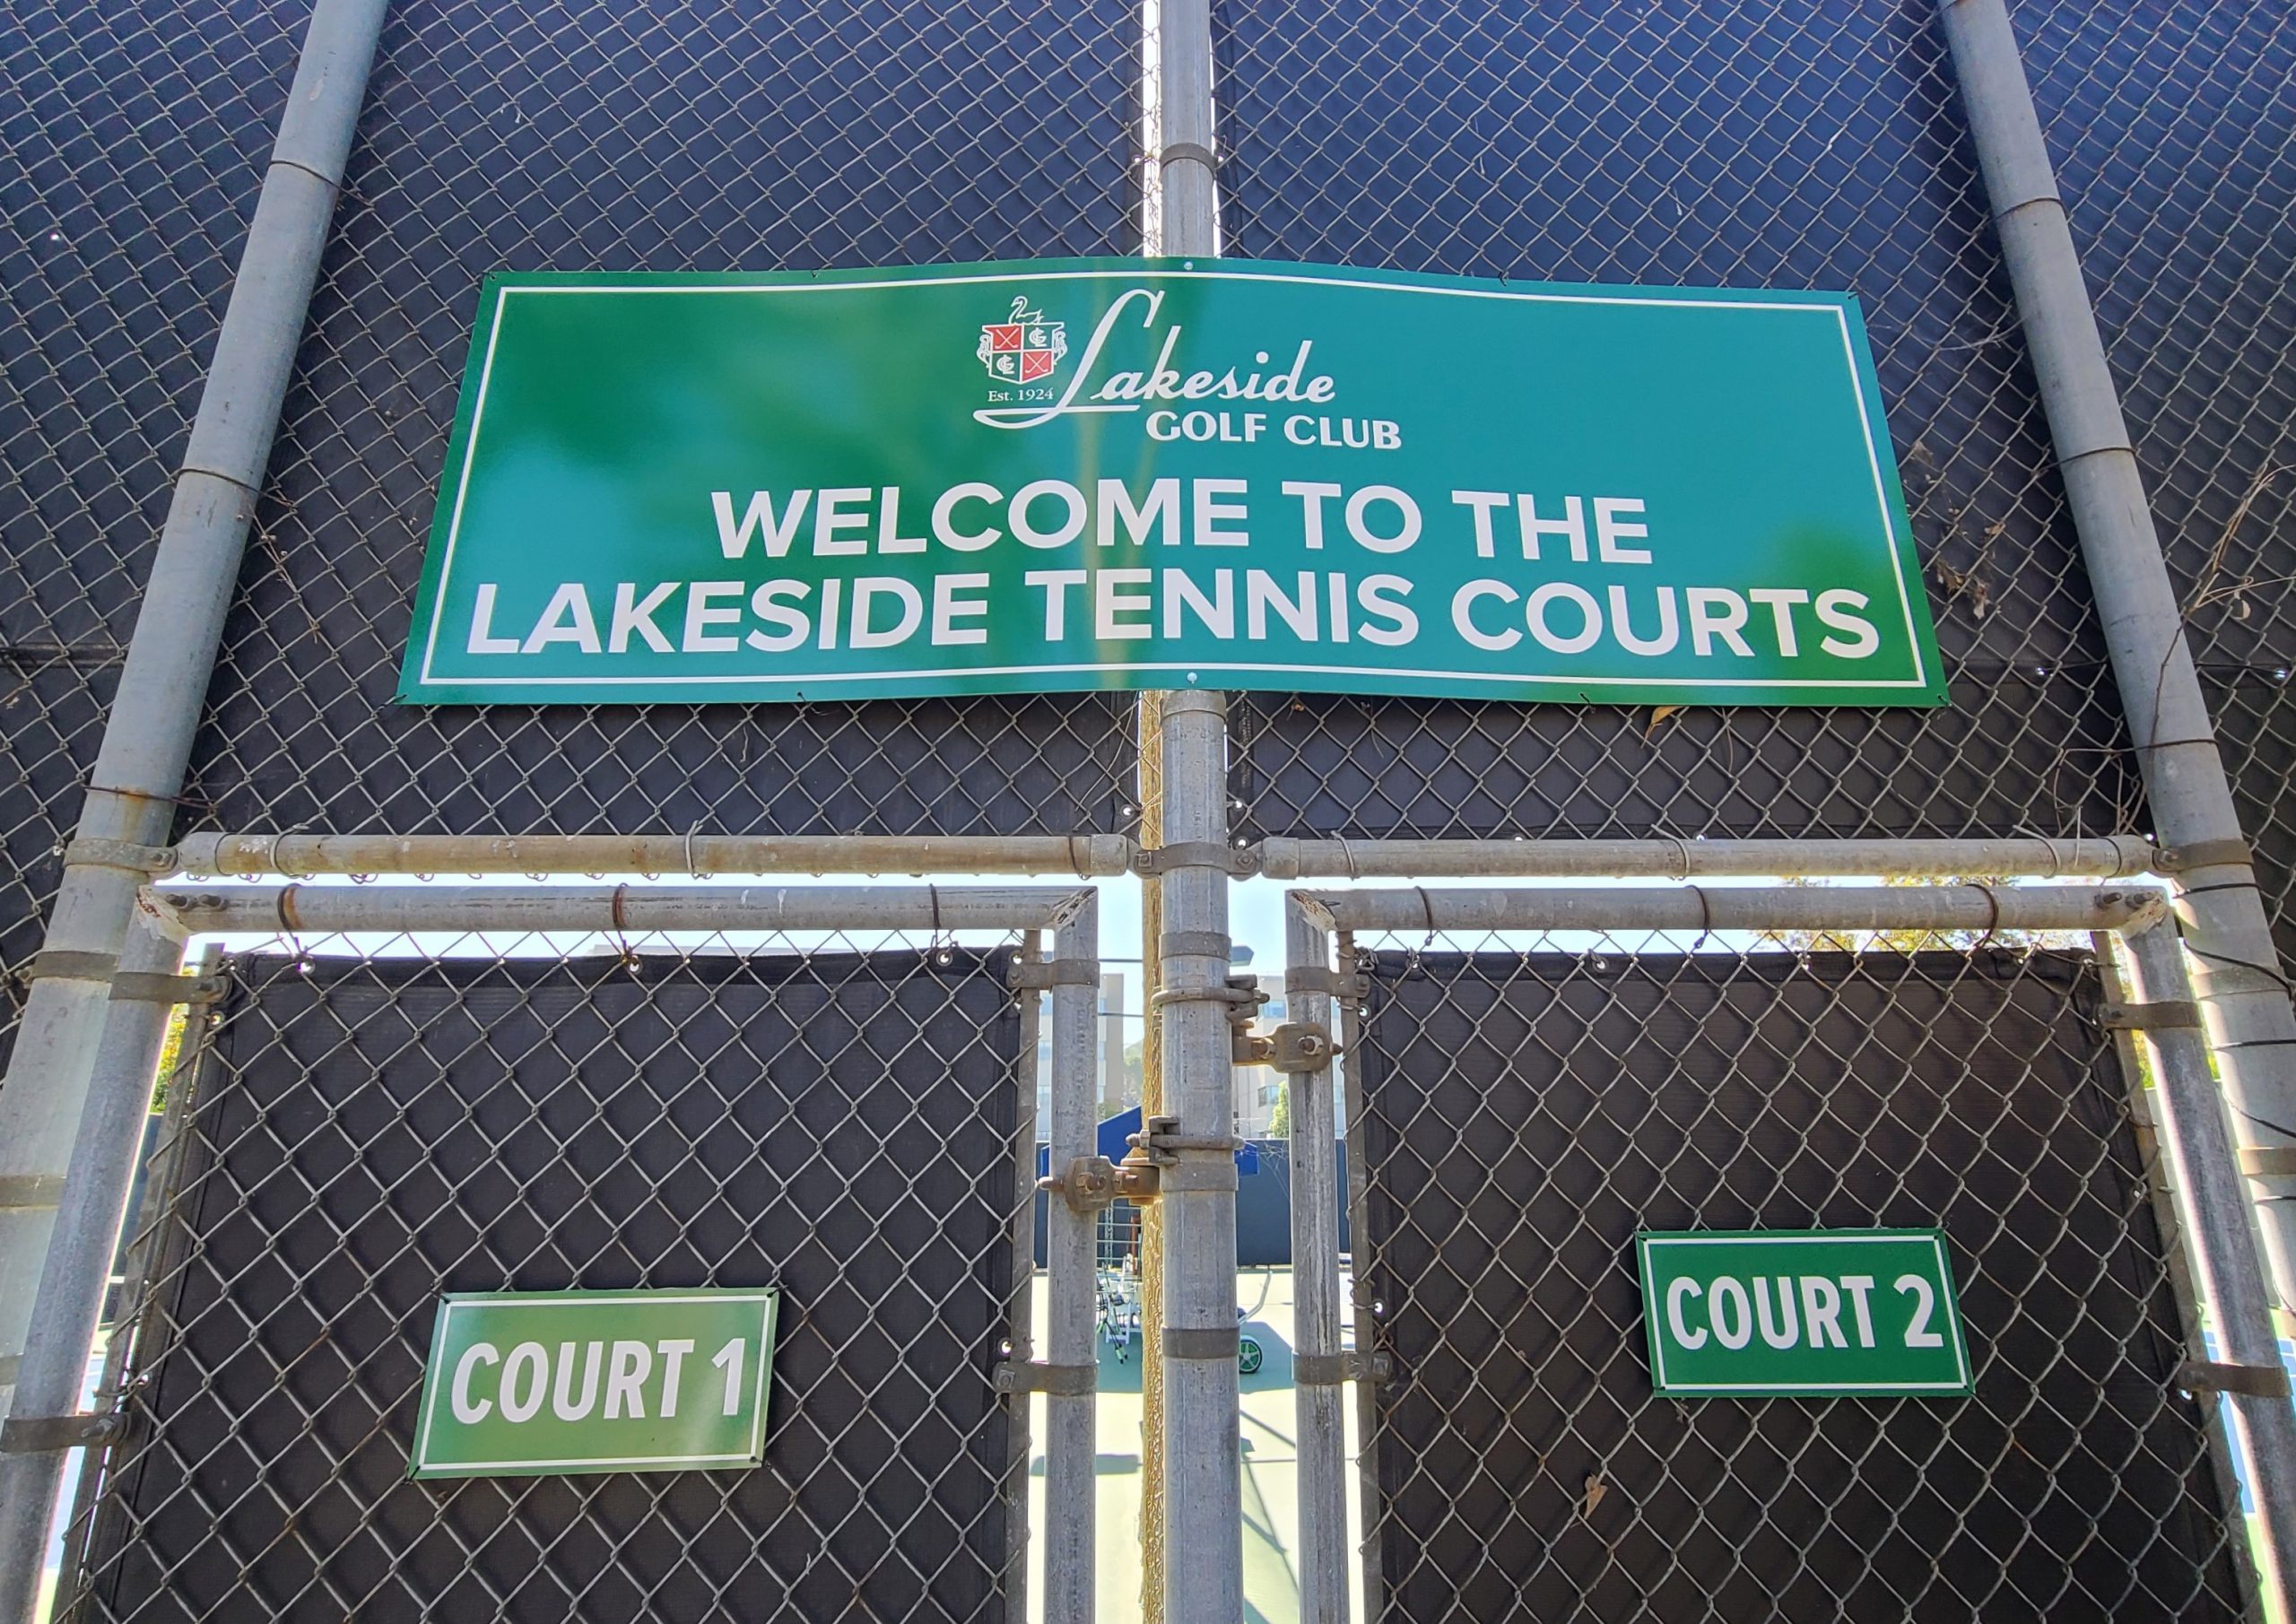 This dibond sign package is for the tennis court as well as for park signage for Lakeside Golf Club in Burbank.